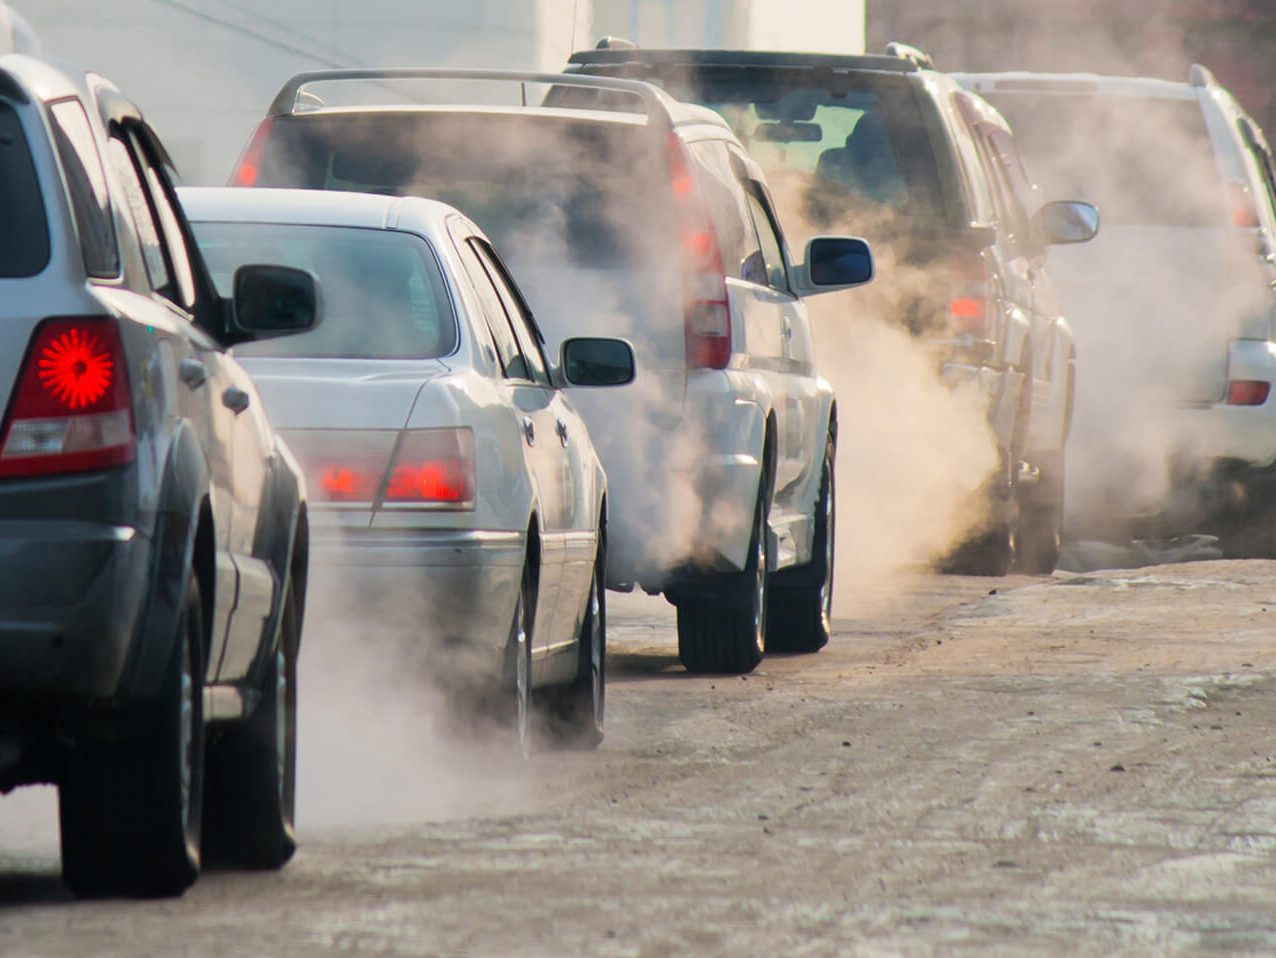 Air pollution in cars: Causes & solutions to improve VIAQ